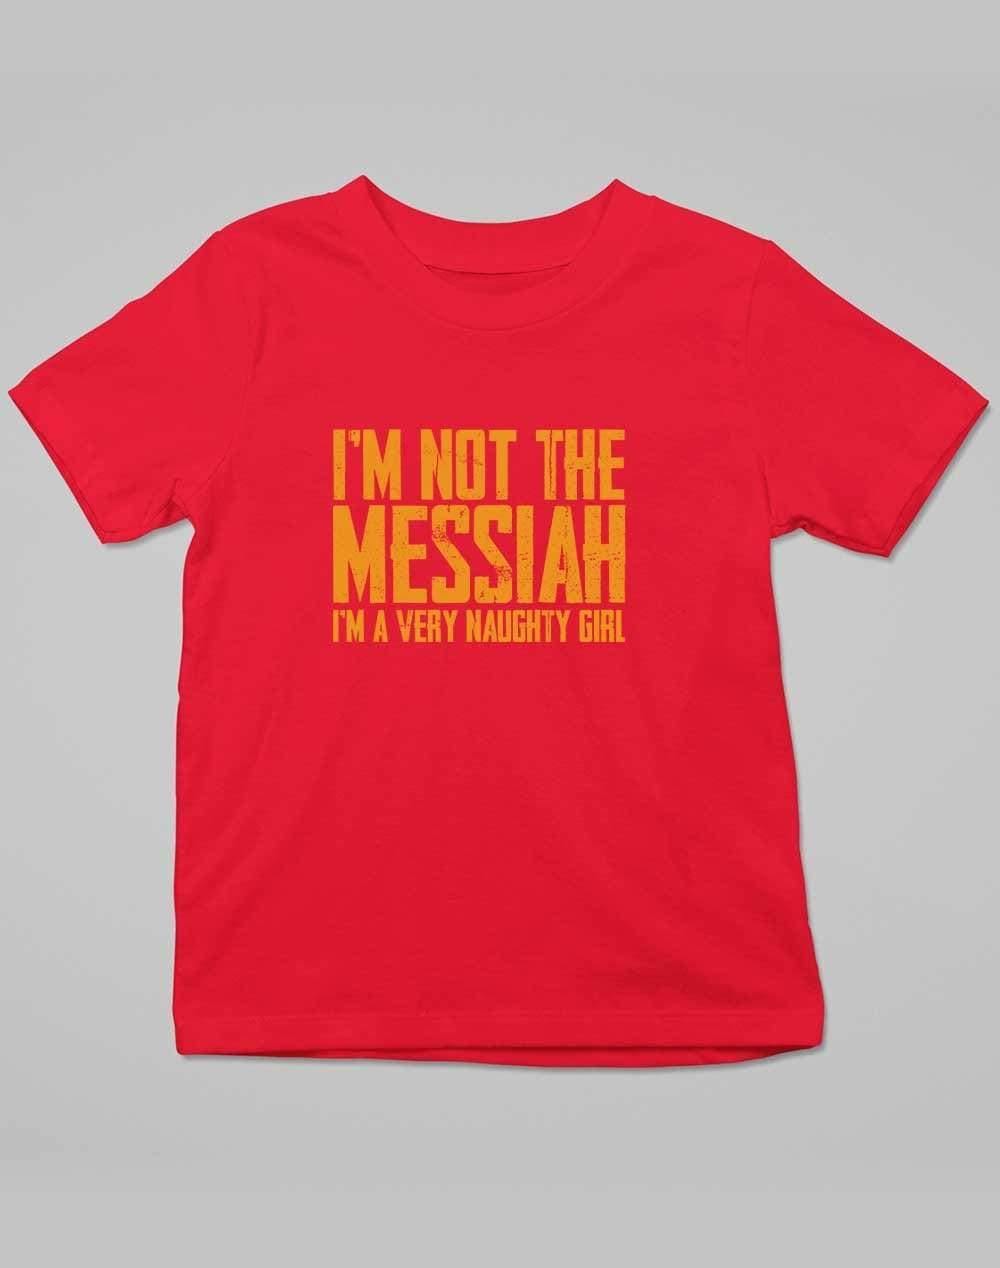 I'm Not the Messiah I'm a Very Naughty Girl Kids T-Shirt 3-4 years / Red  - Off World Tees